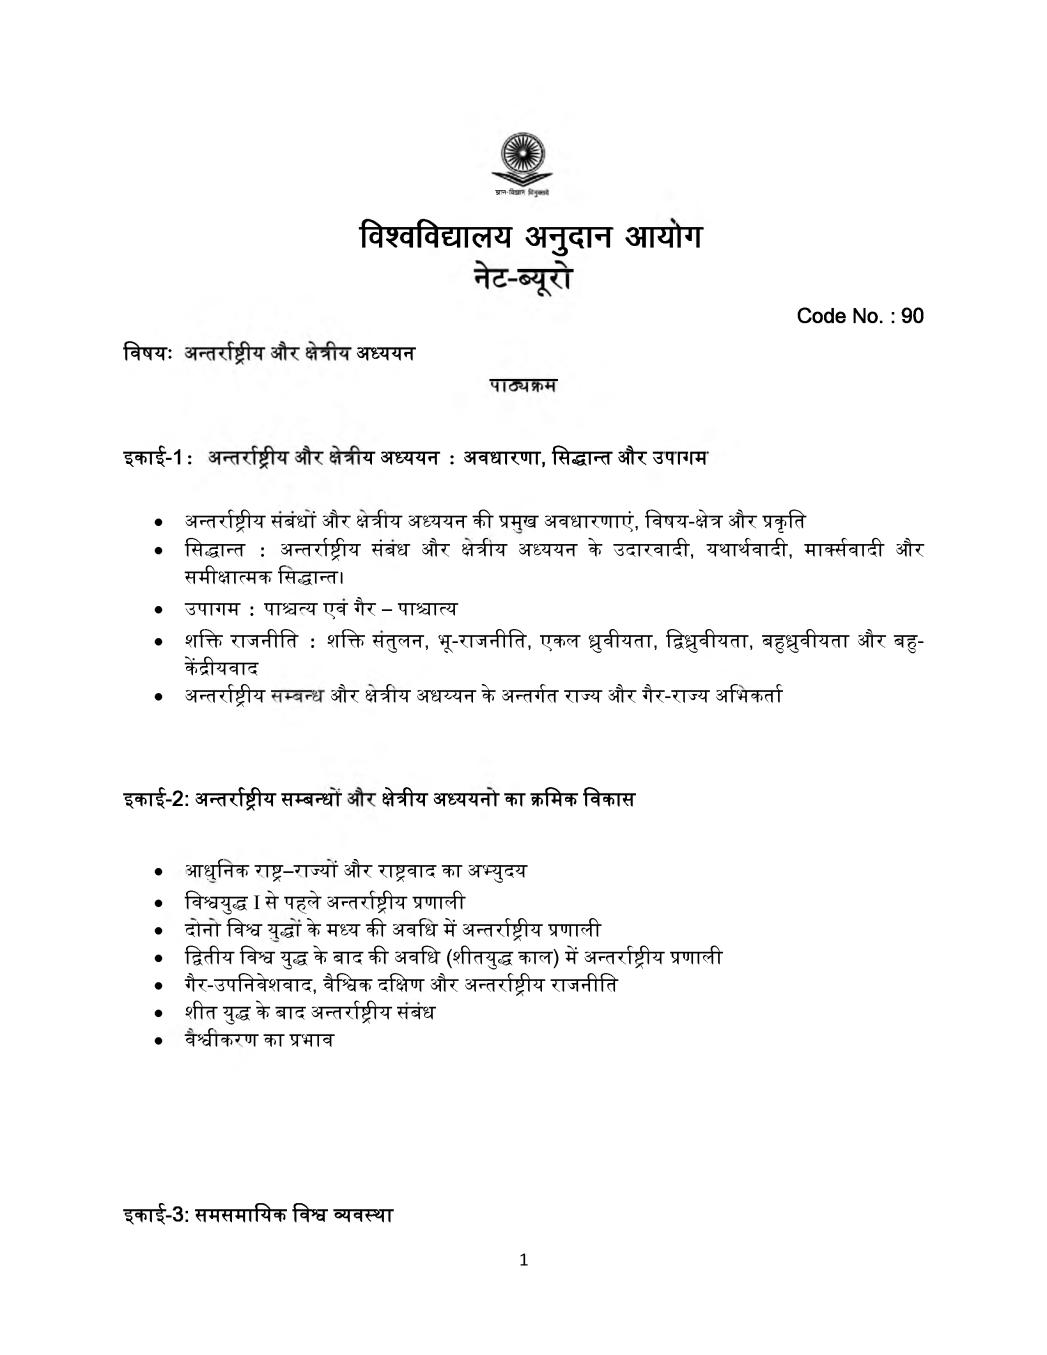 UGC NET Syllabus for International and Area Studies 2020 in Hindi - Page 1